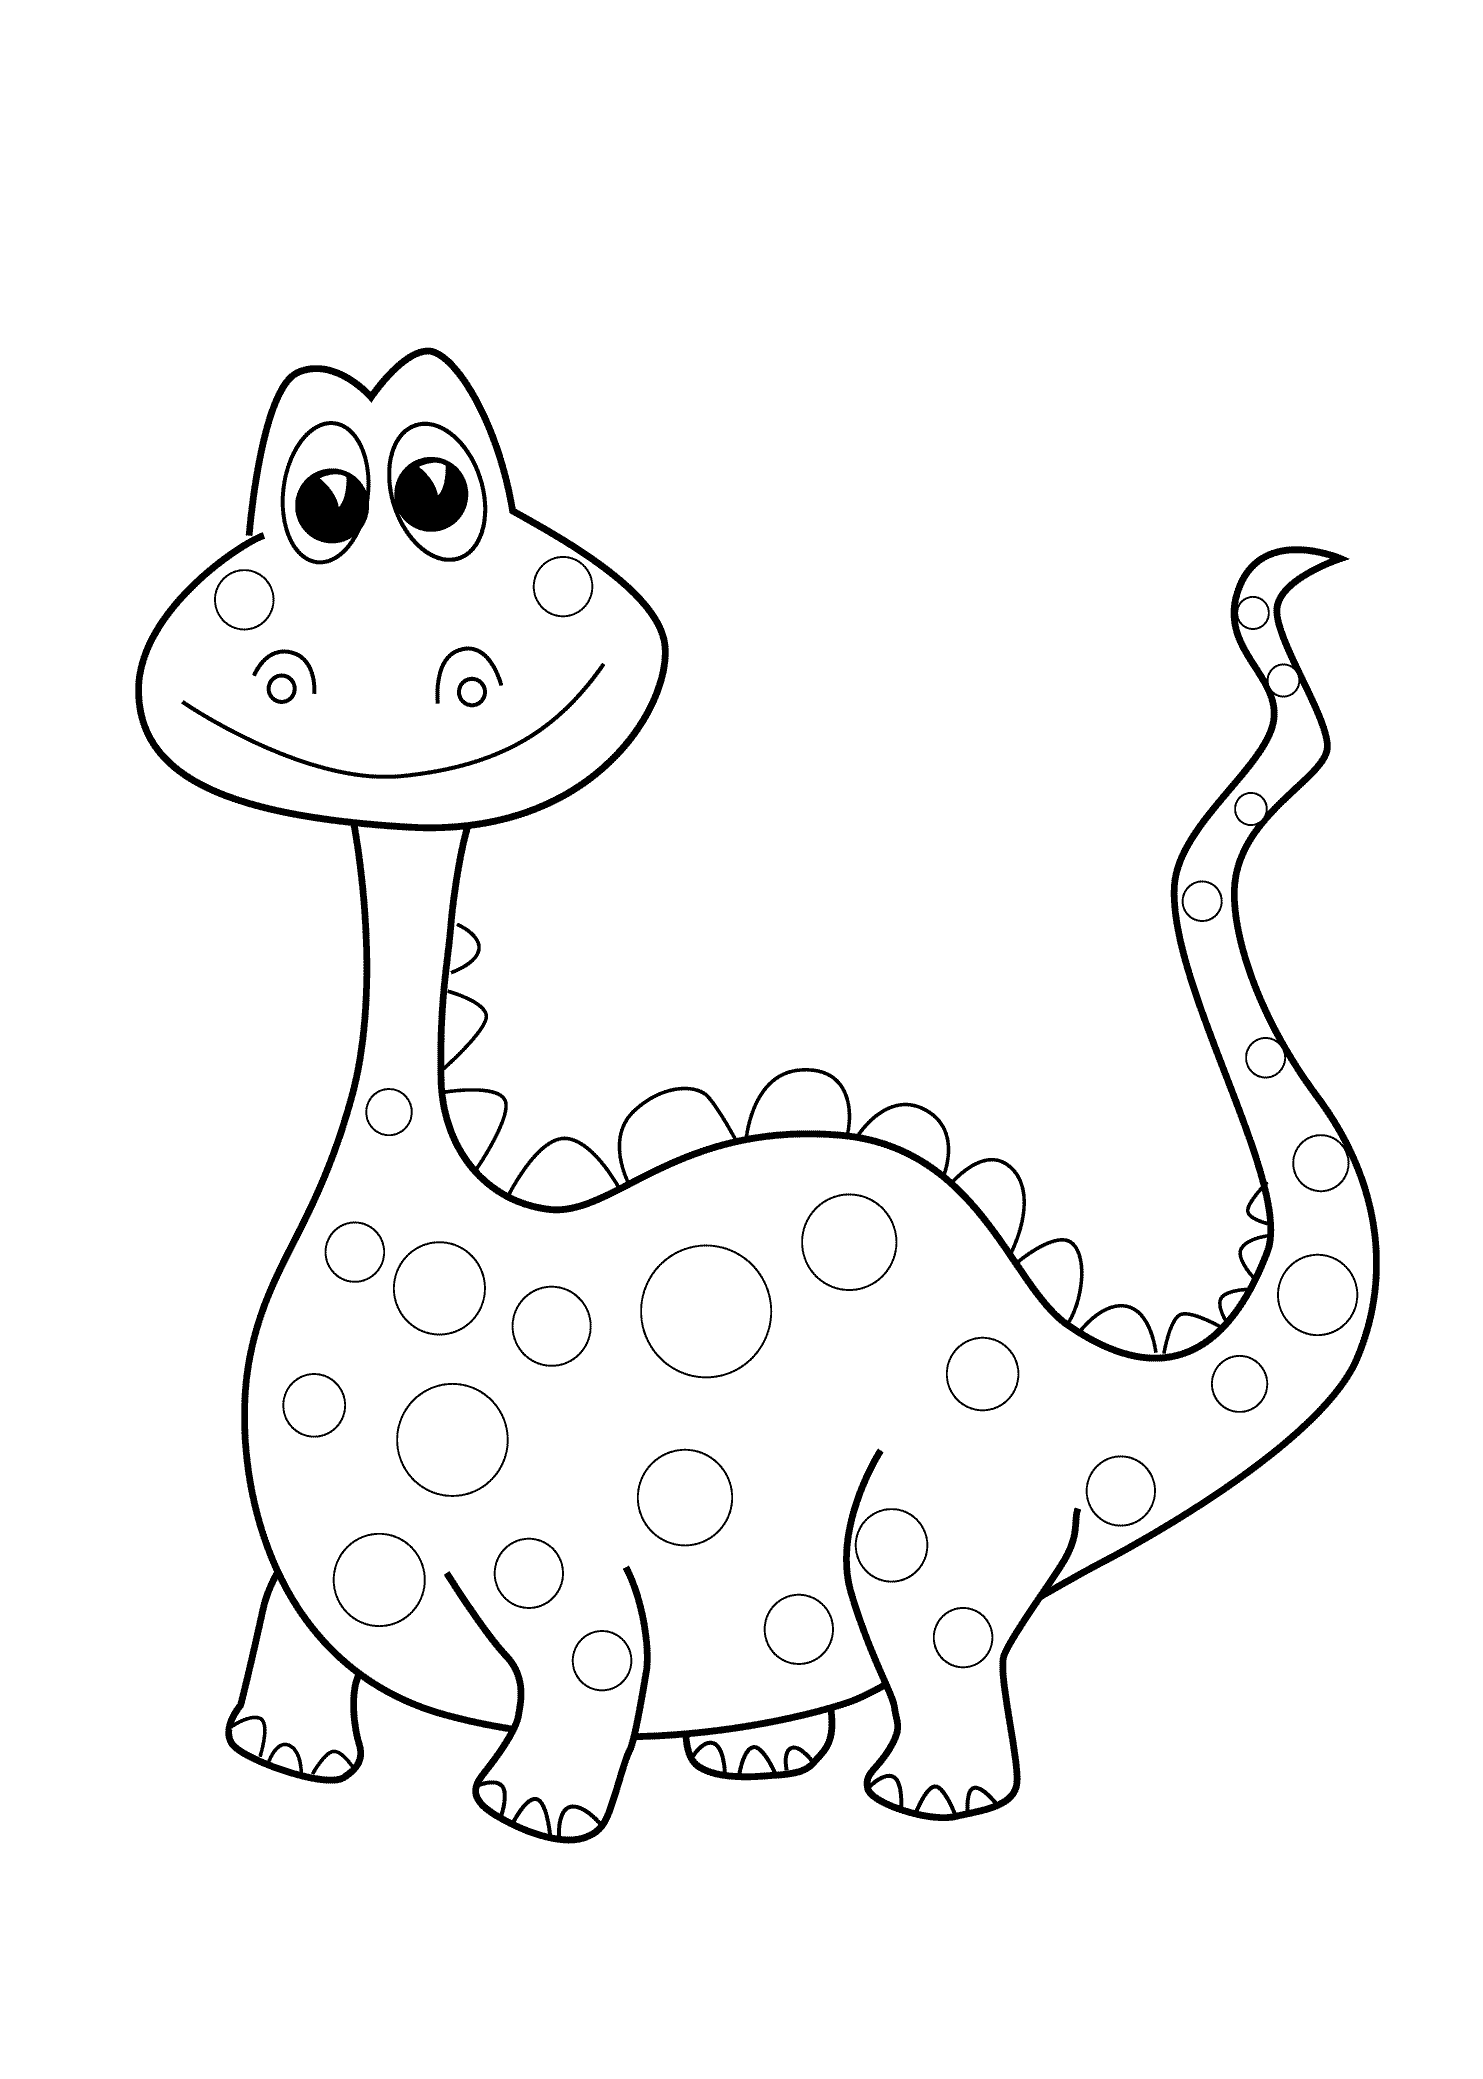 Dinosaur Coloring Sheets For Toddlers